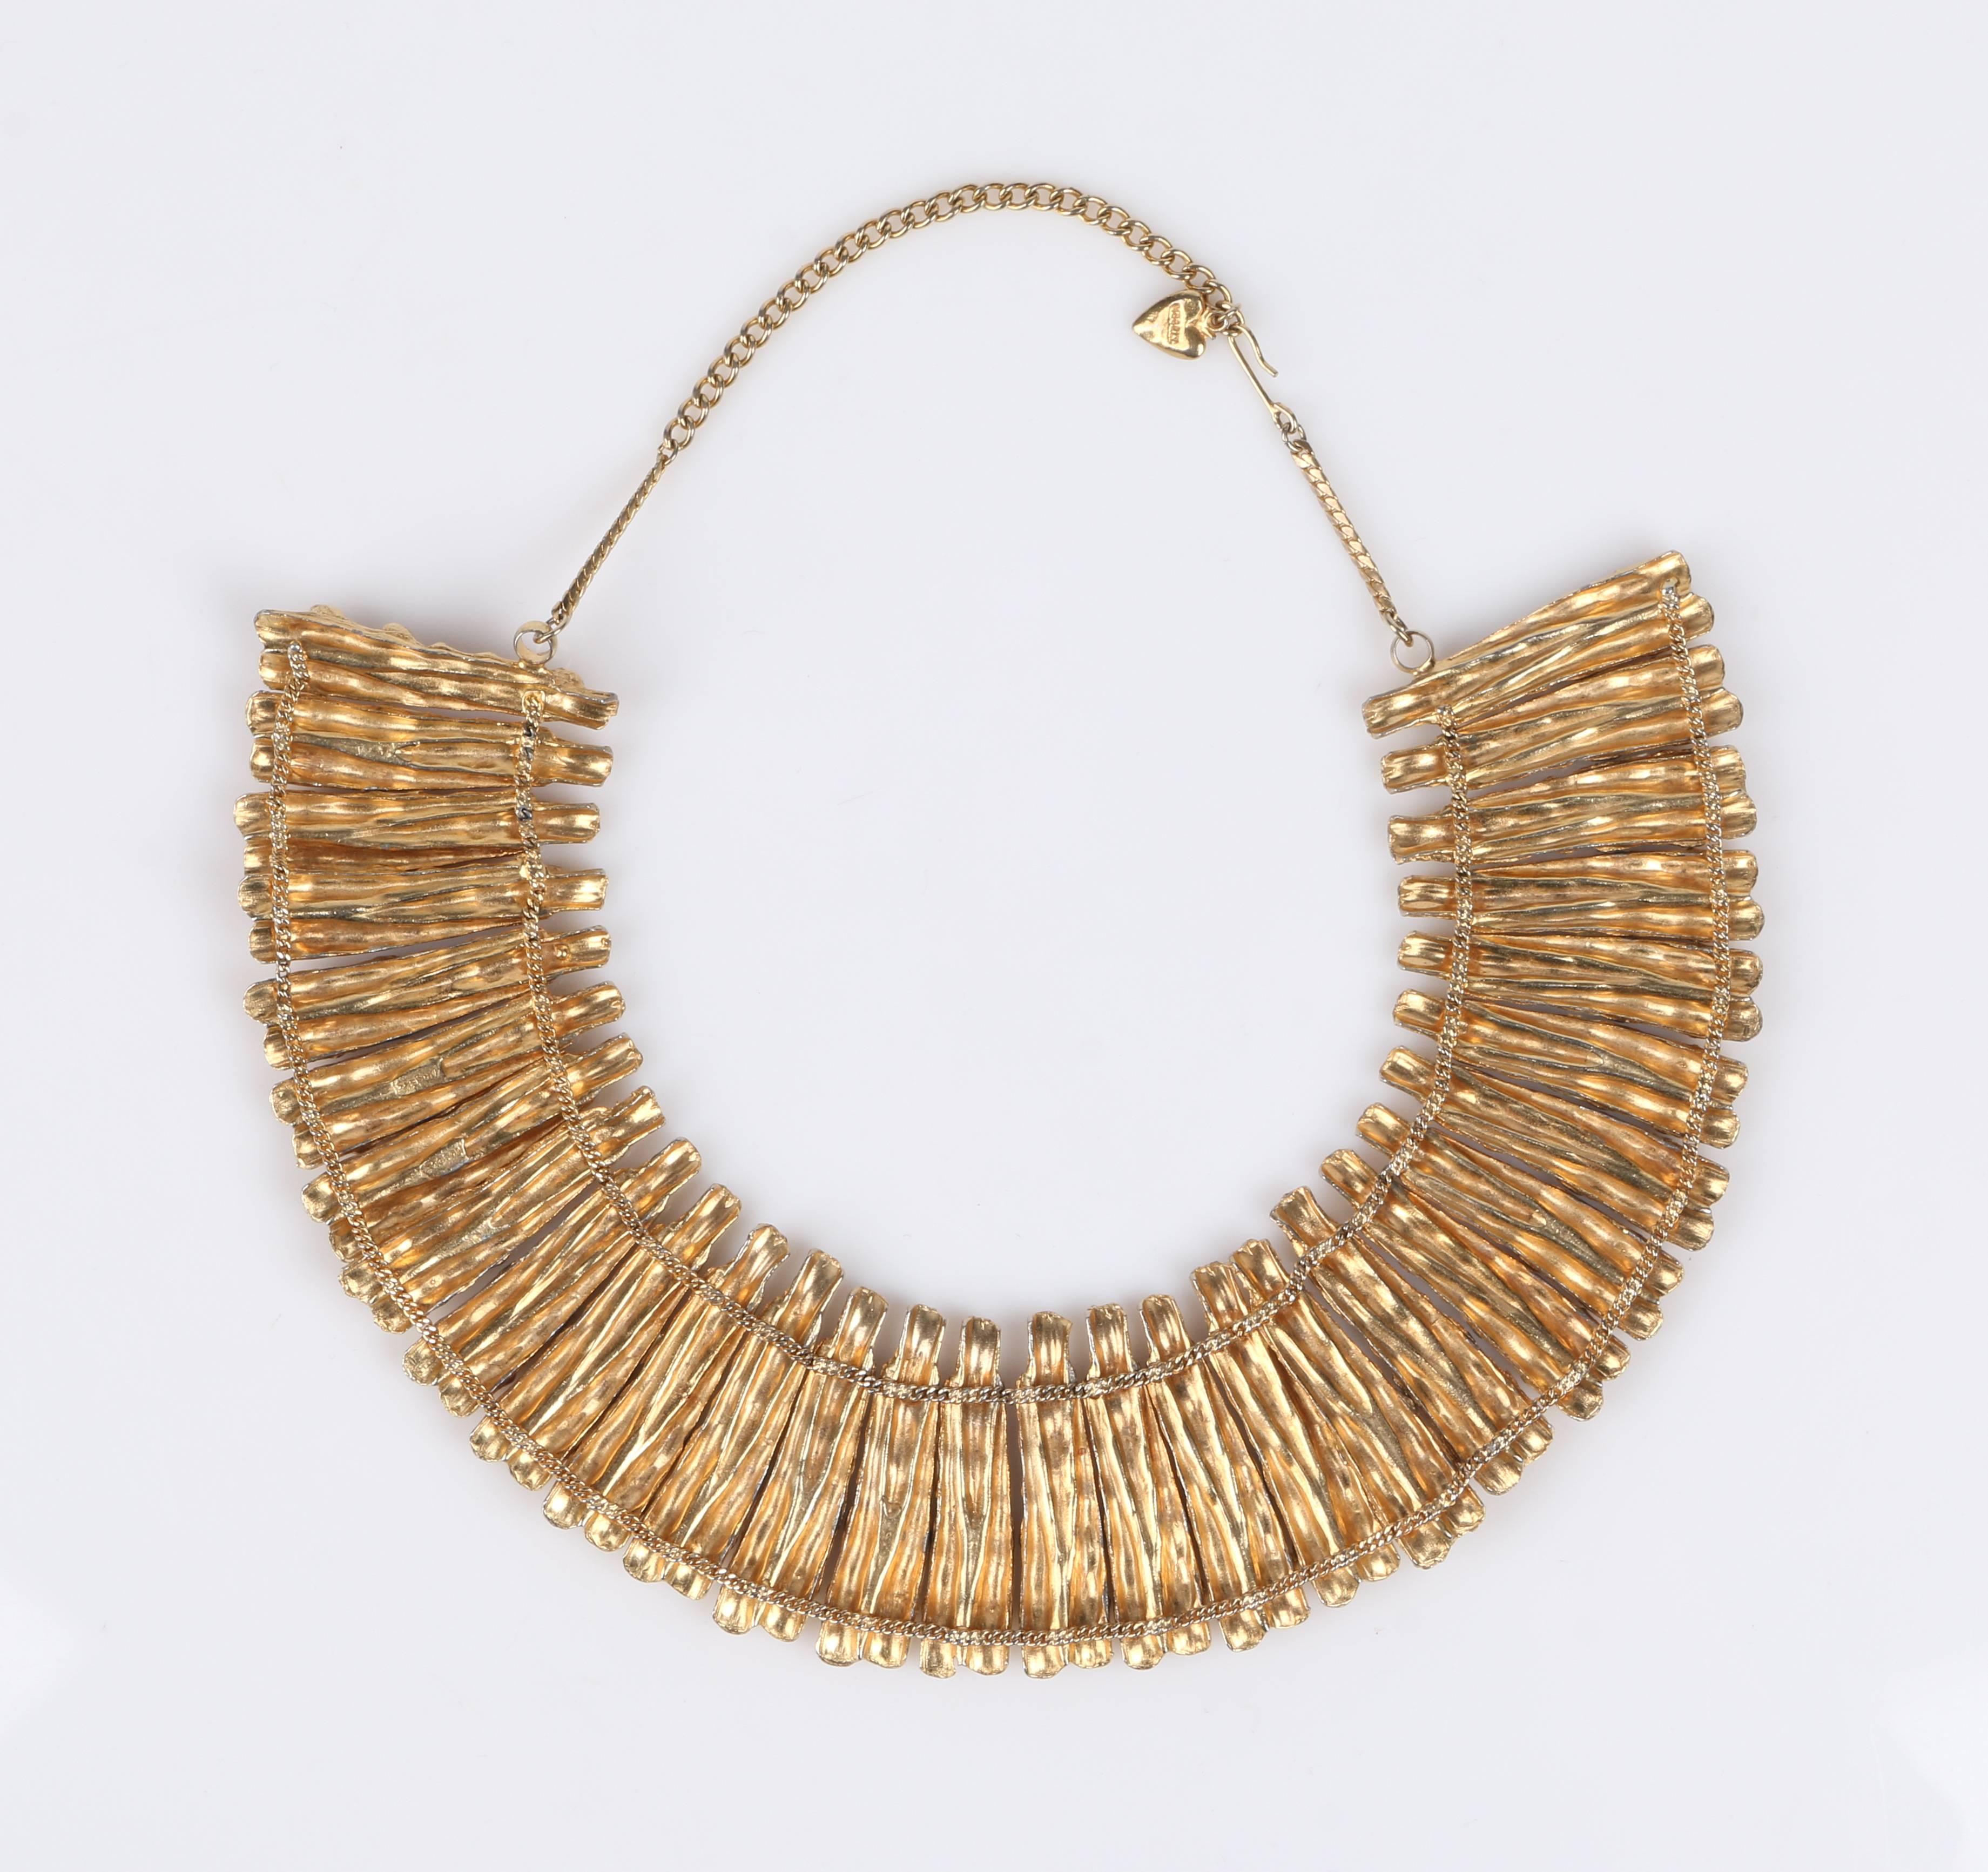 gold egyptian collar necklace